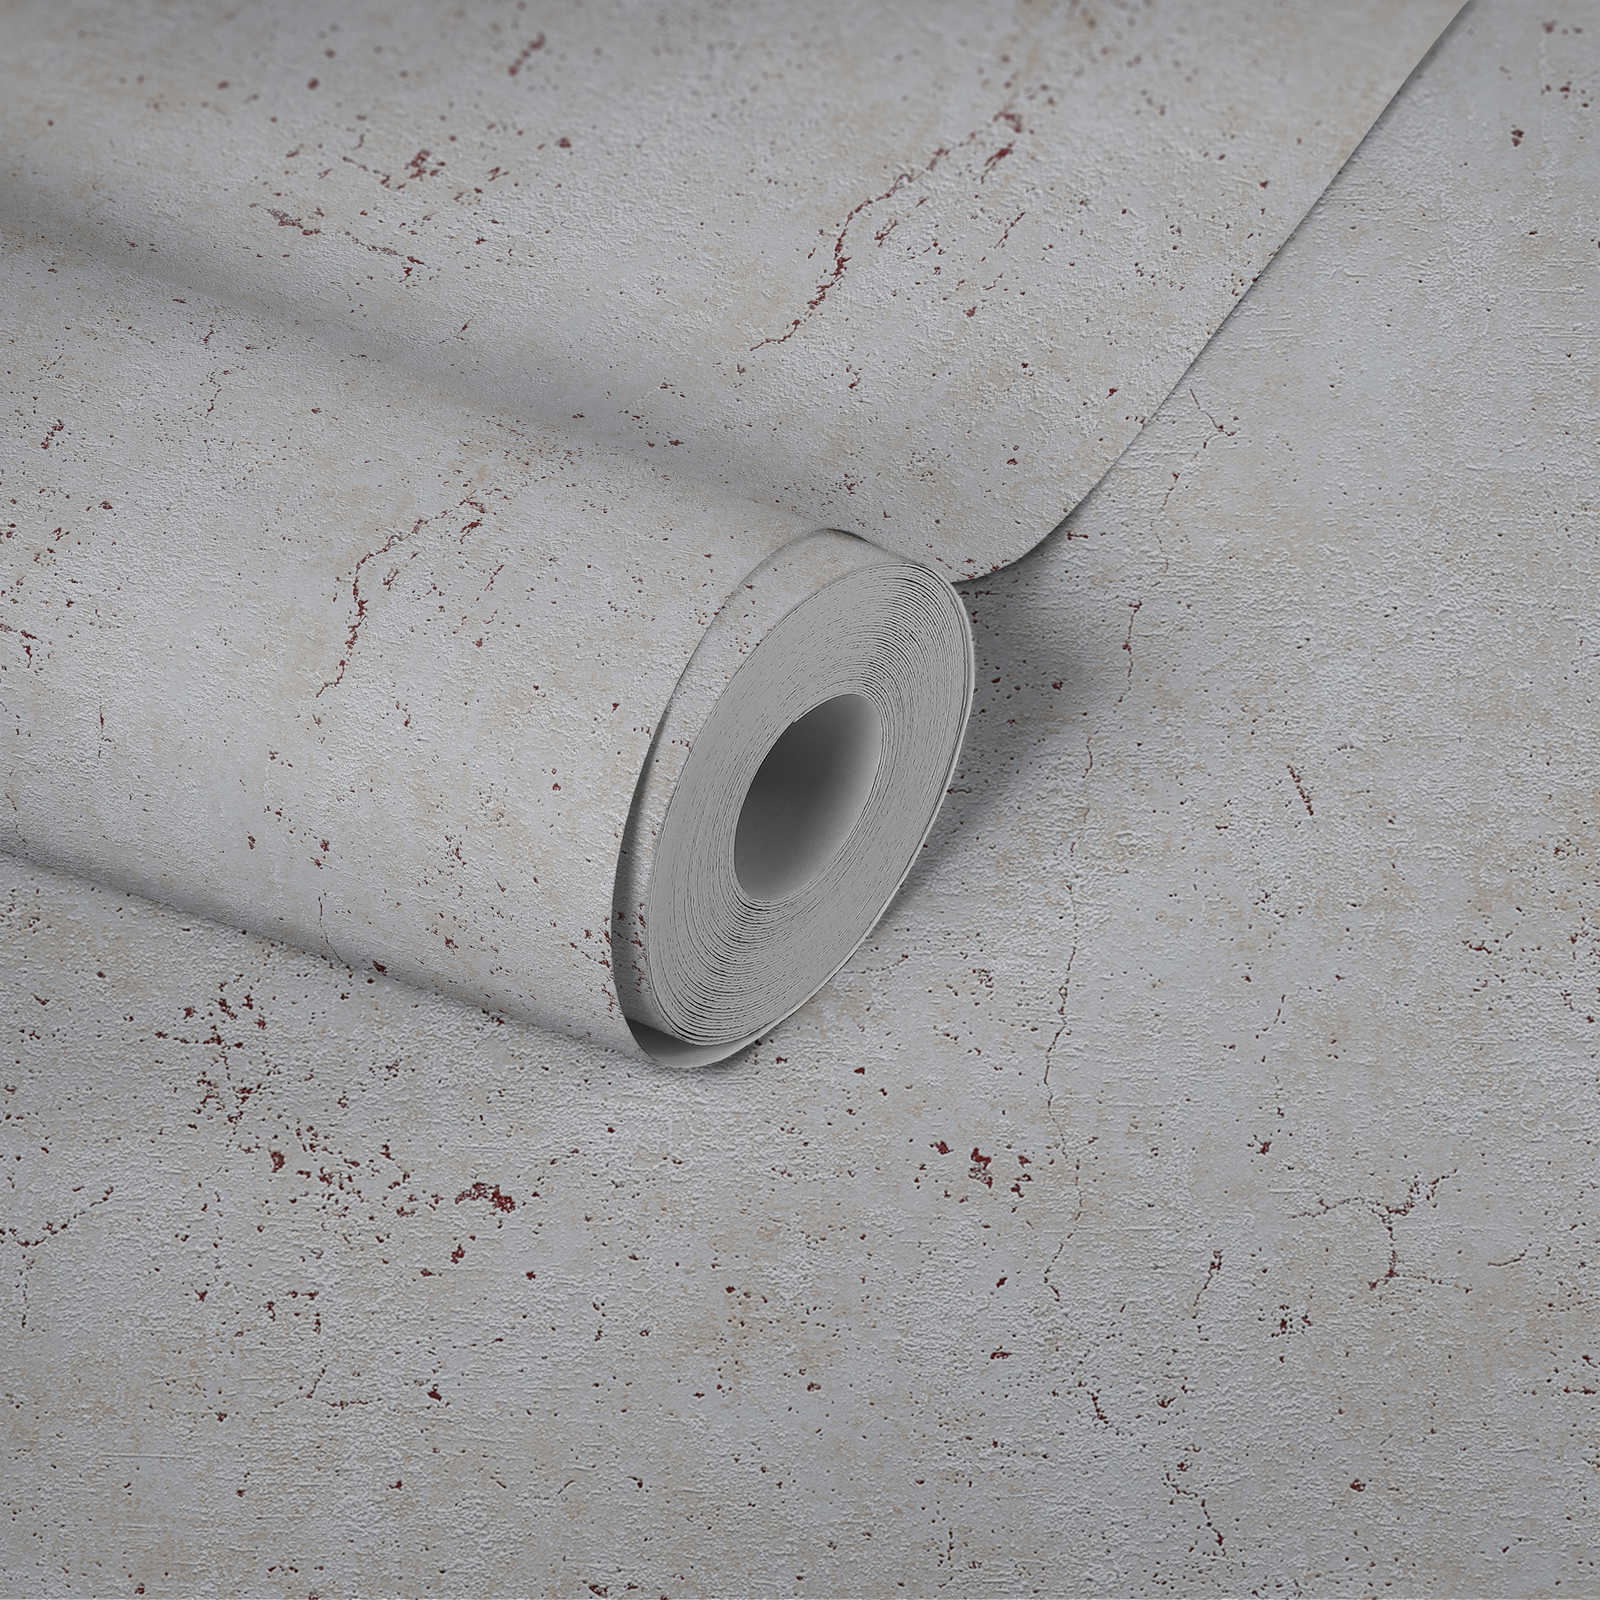             Concrete look wallpaper with surface texture - grey
        